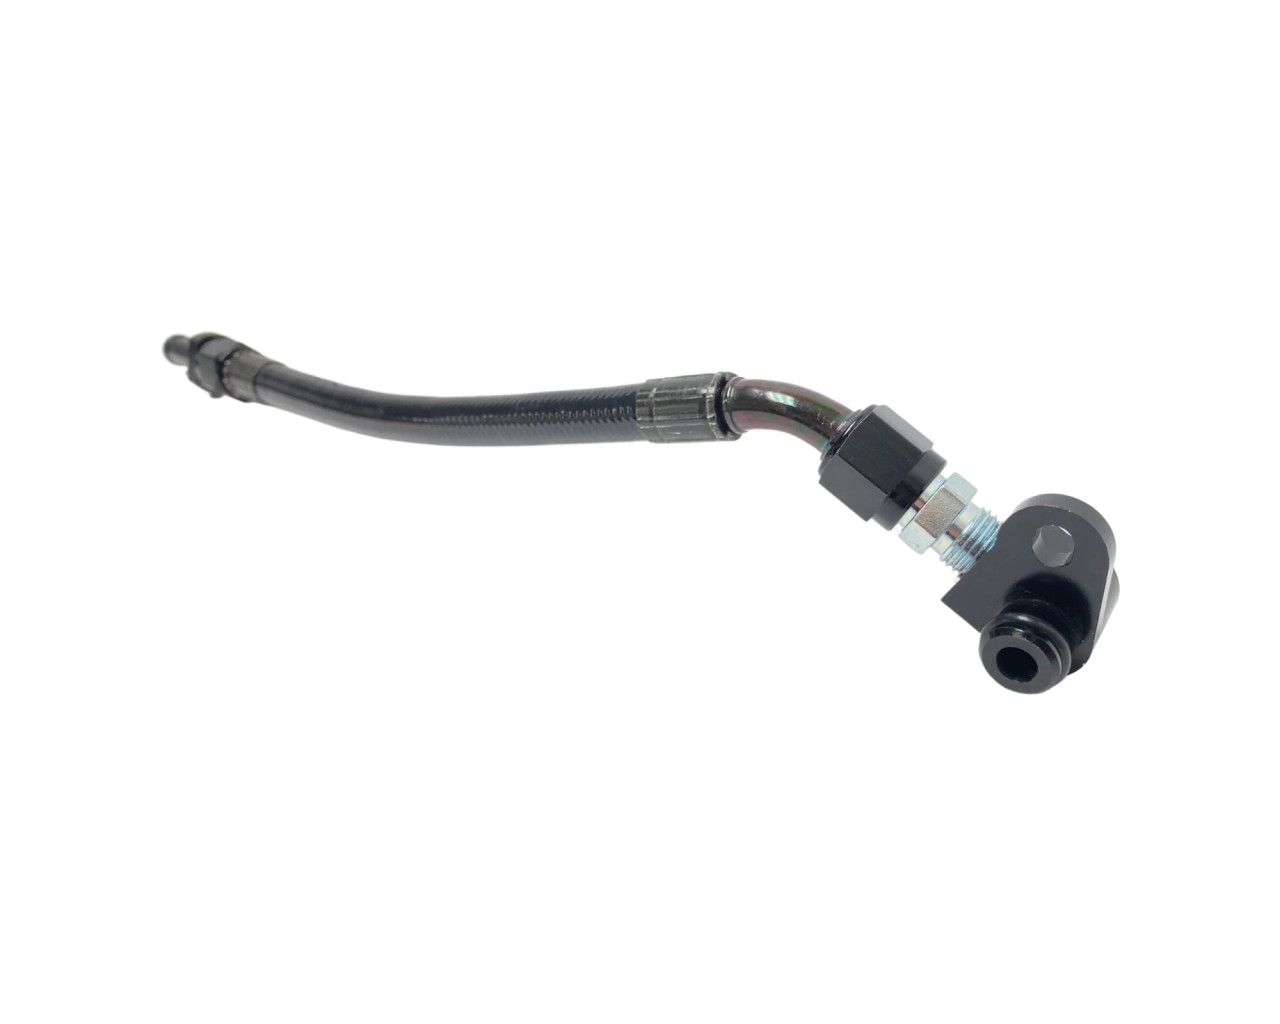 SPE TURBO COOLANT FEED LINE for 2017 to 2019 6.7L POWERSTROKE (SPE-S100152) No View 